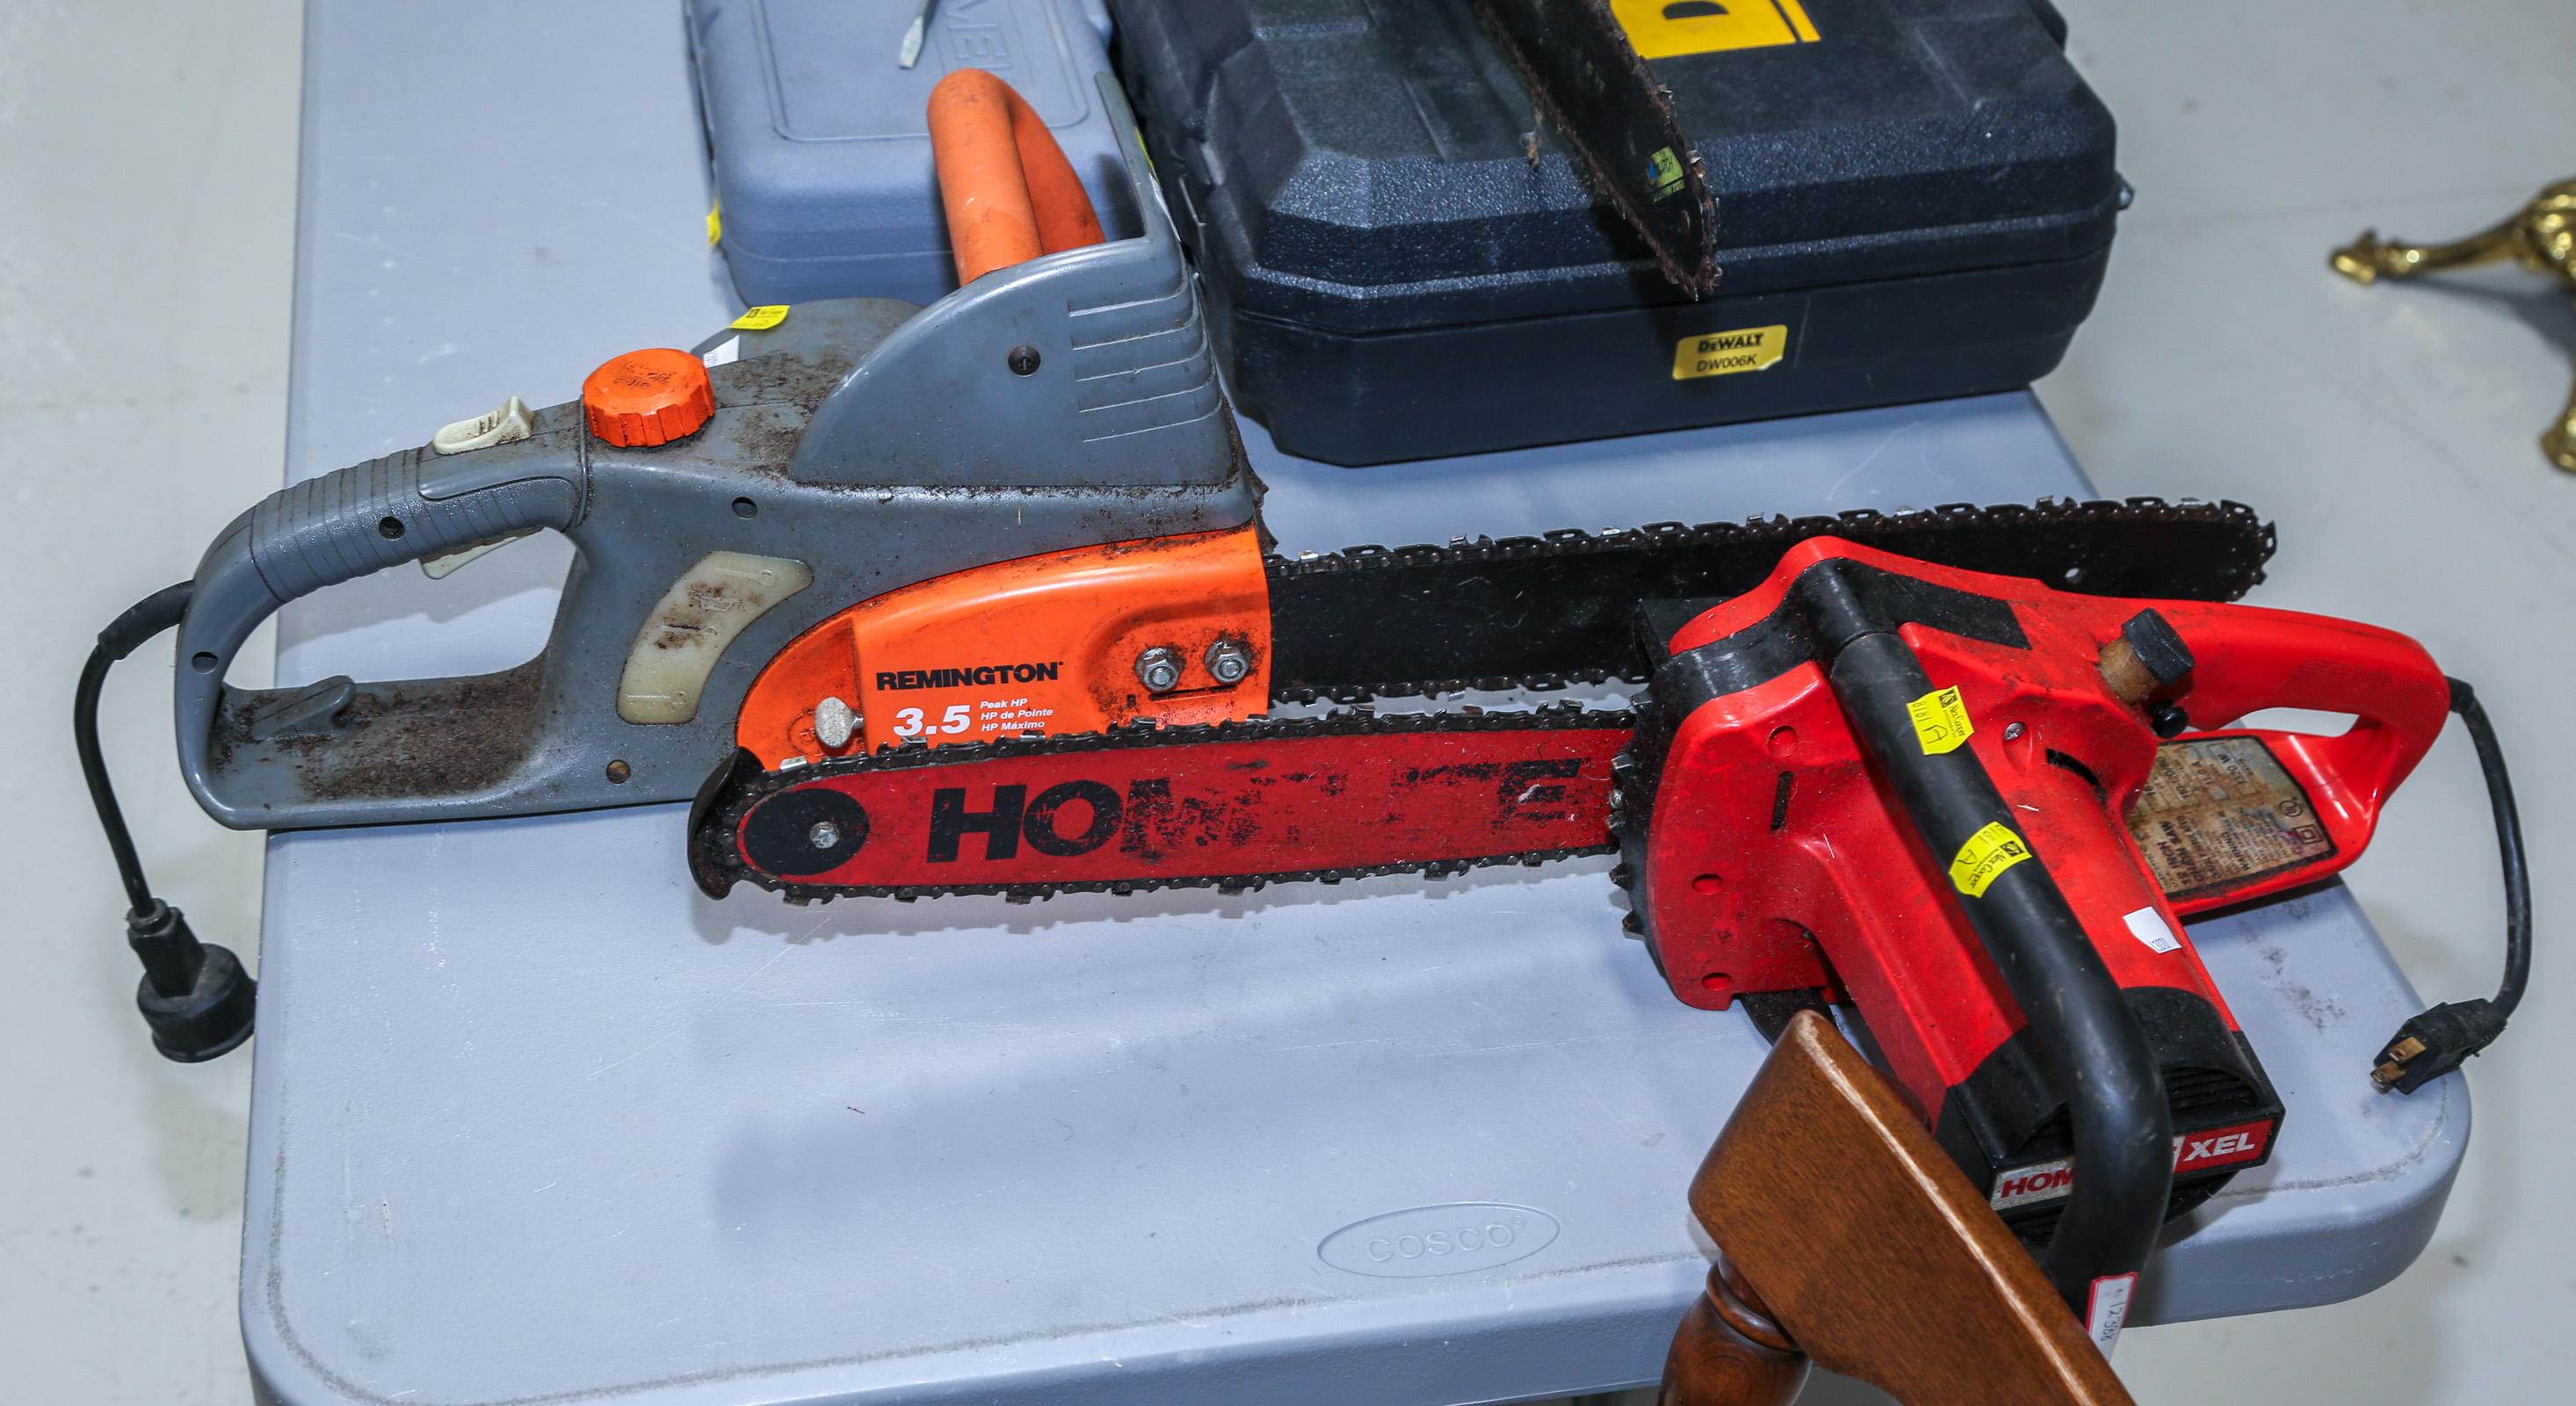 TWO CHAIN SAWS Comprising a Homelite